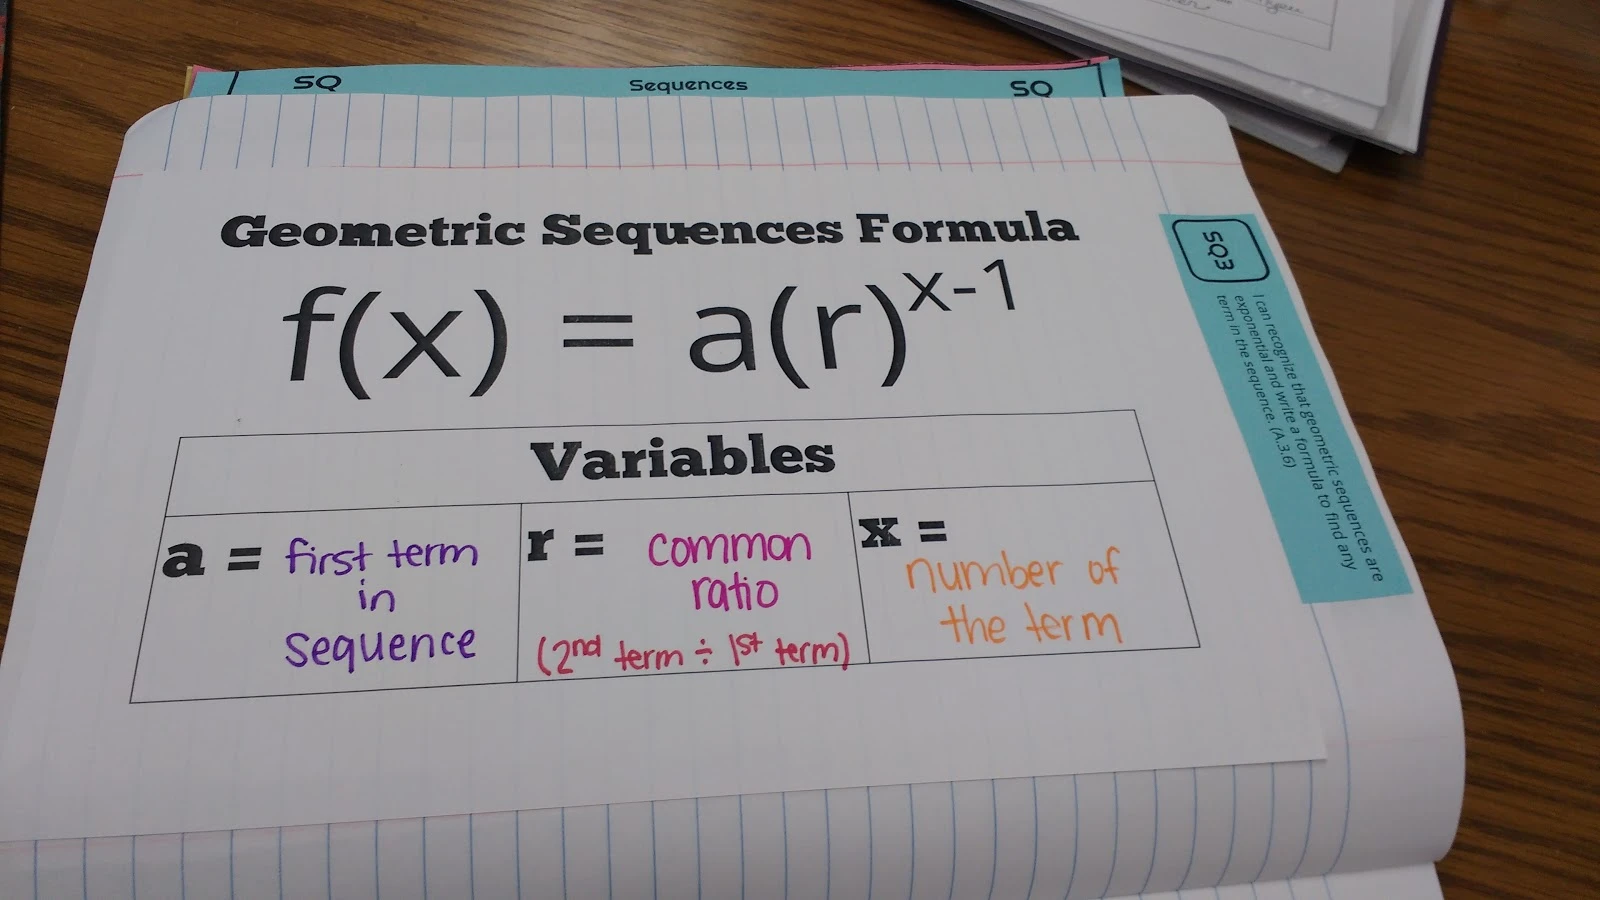 Geometric Sequences and Series